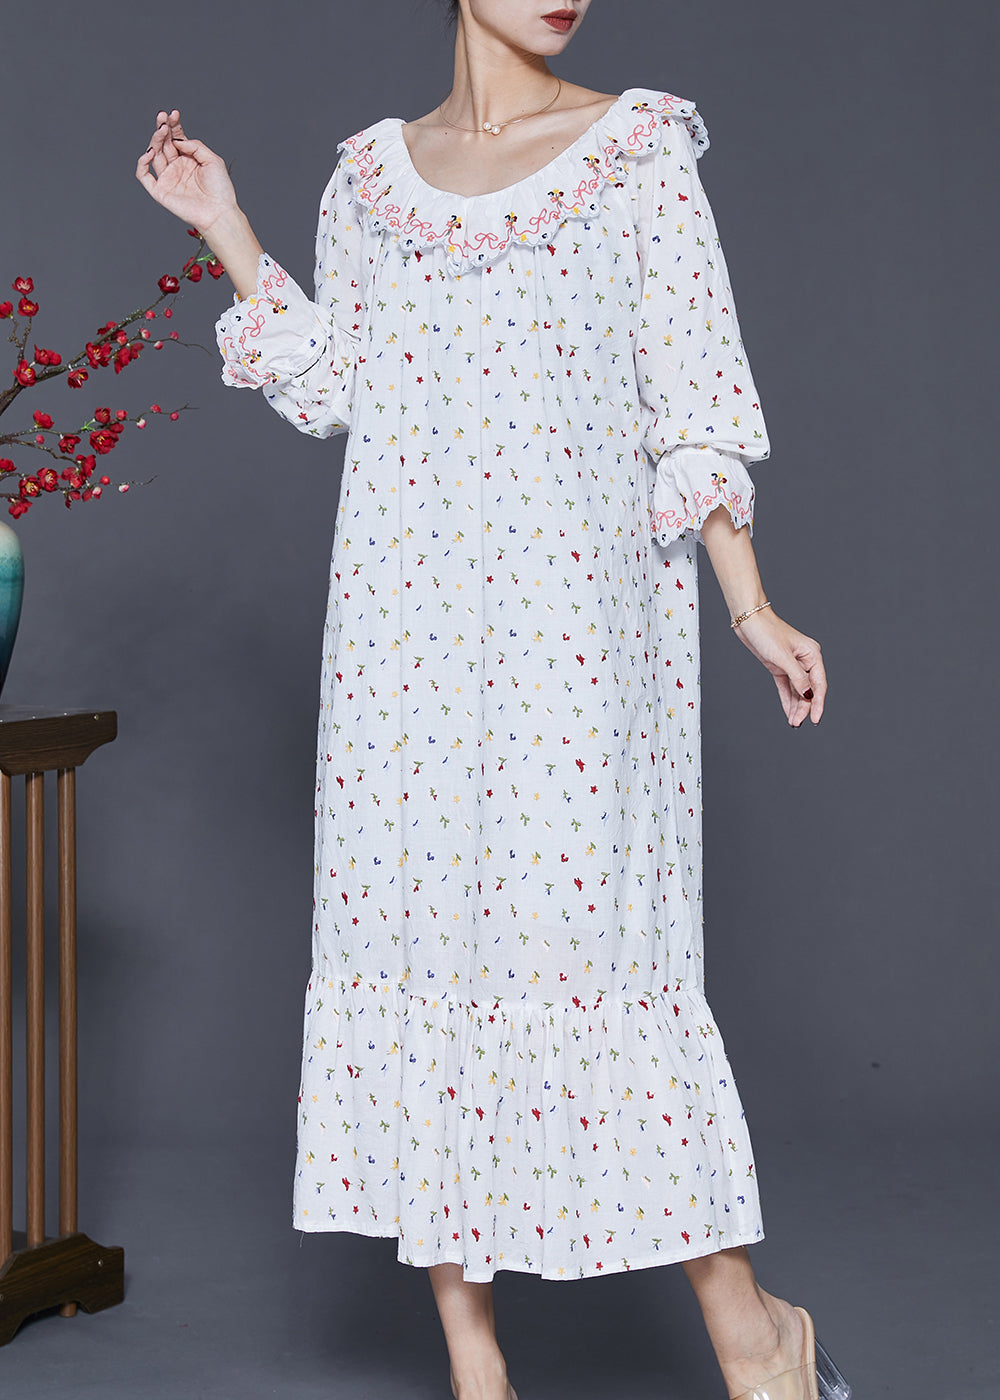 Art White Embroidered Cotton Vacation Dresses Spring